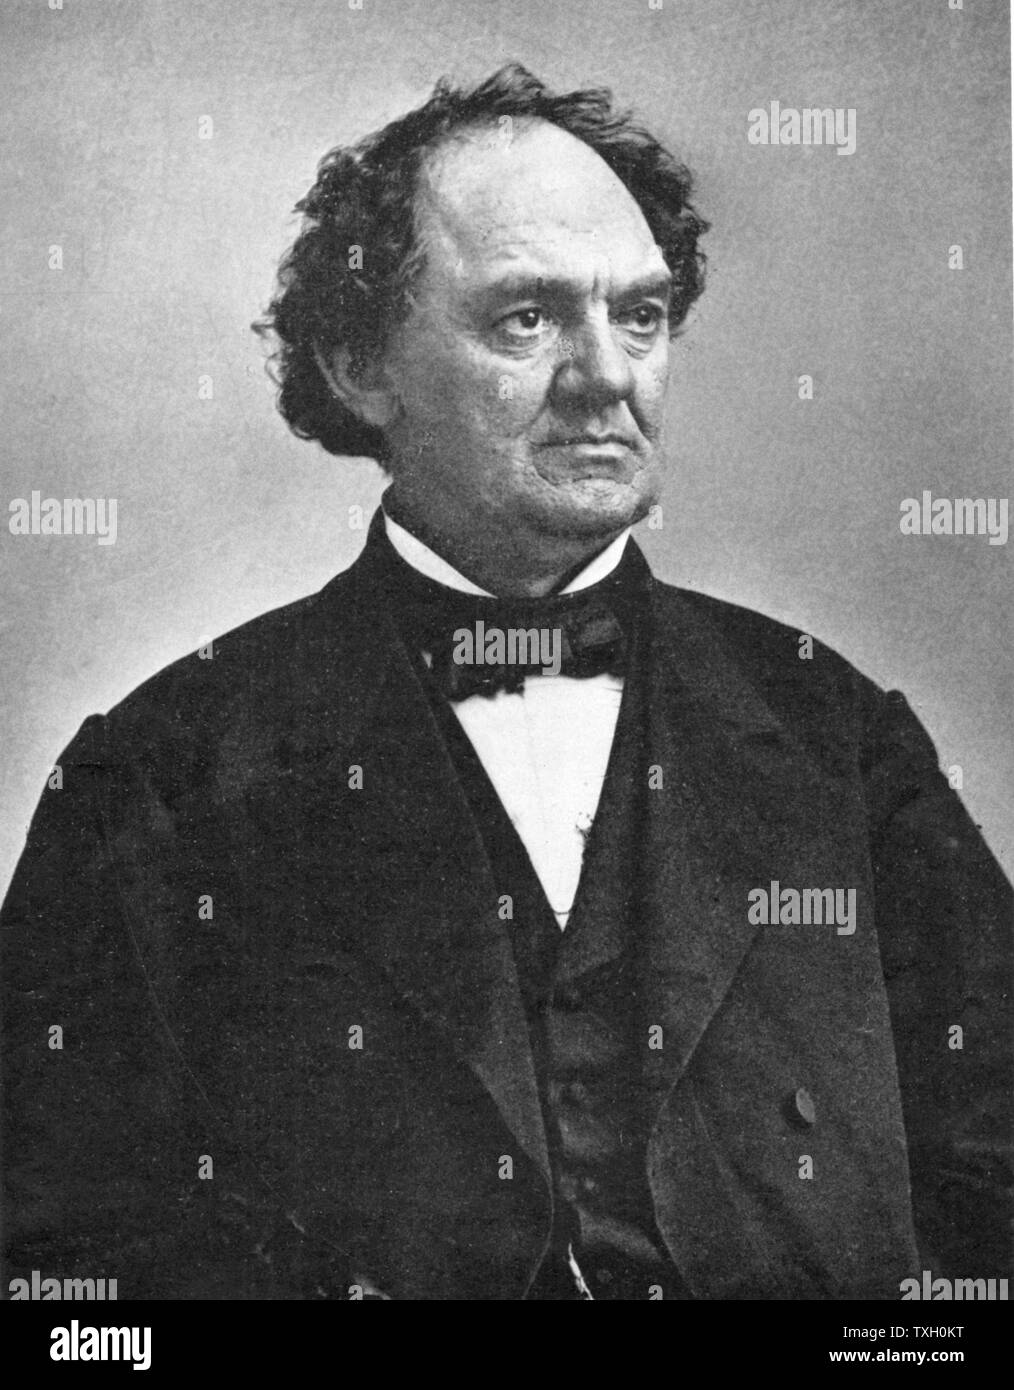 Phineas Taylor Barnum (1810-1891) American showman; co-founder of Barnum and Bailey circus. Engraving published London 1864 Stock Photo